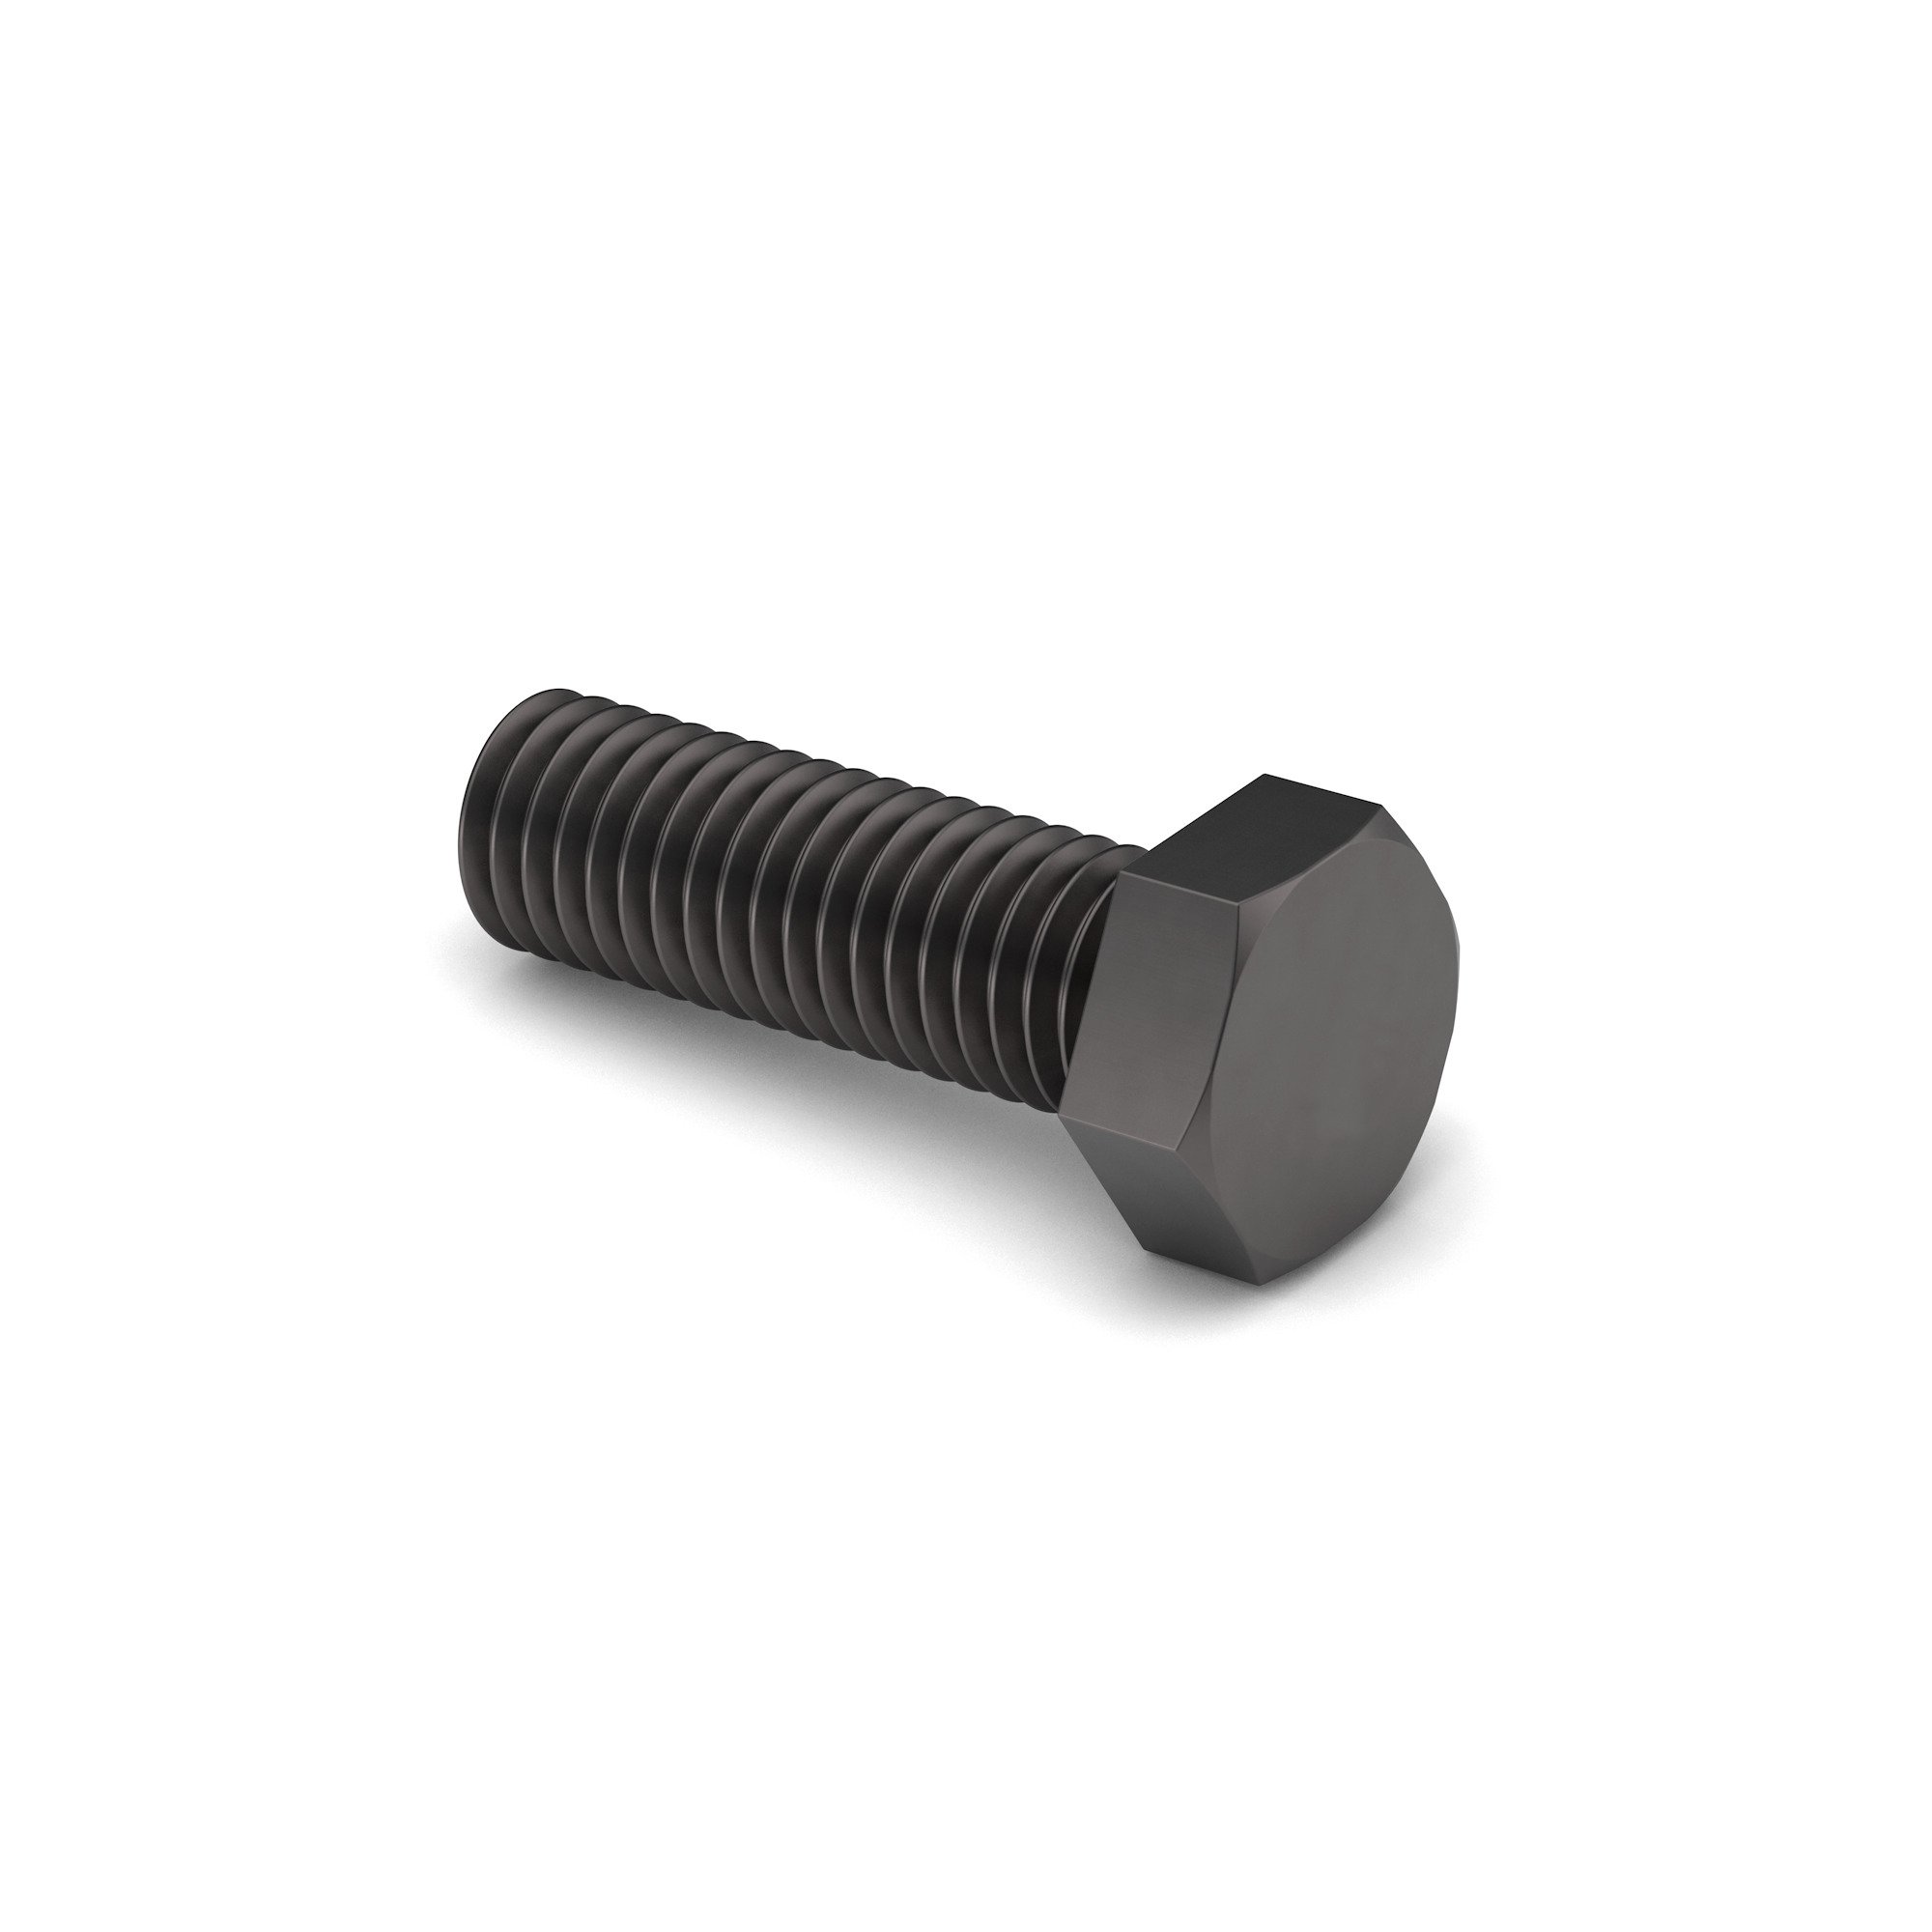 M6-1x20 A2-70 Stainless Hex Hd Cap Screw w/.096 Hole Drilled Length of Bolt Pickled - No Oil